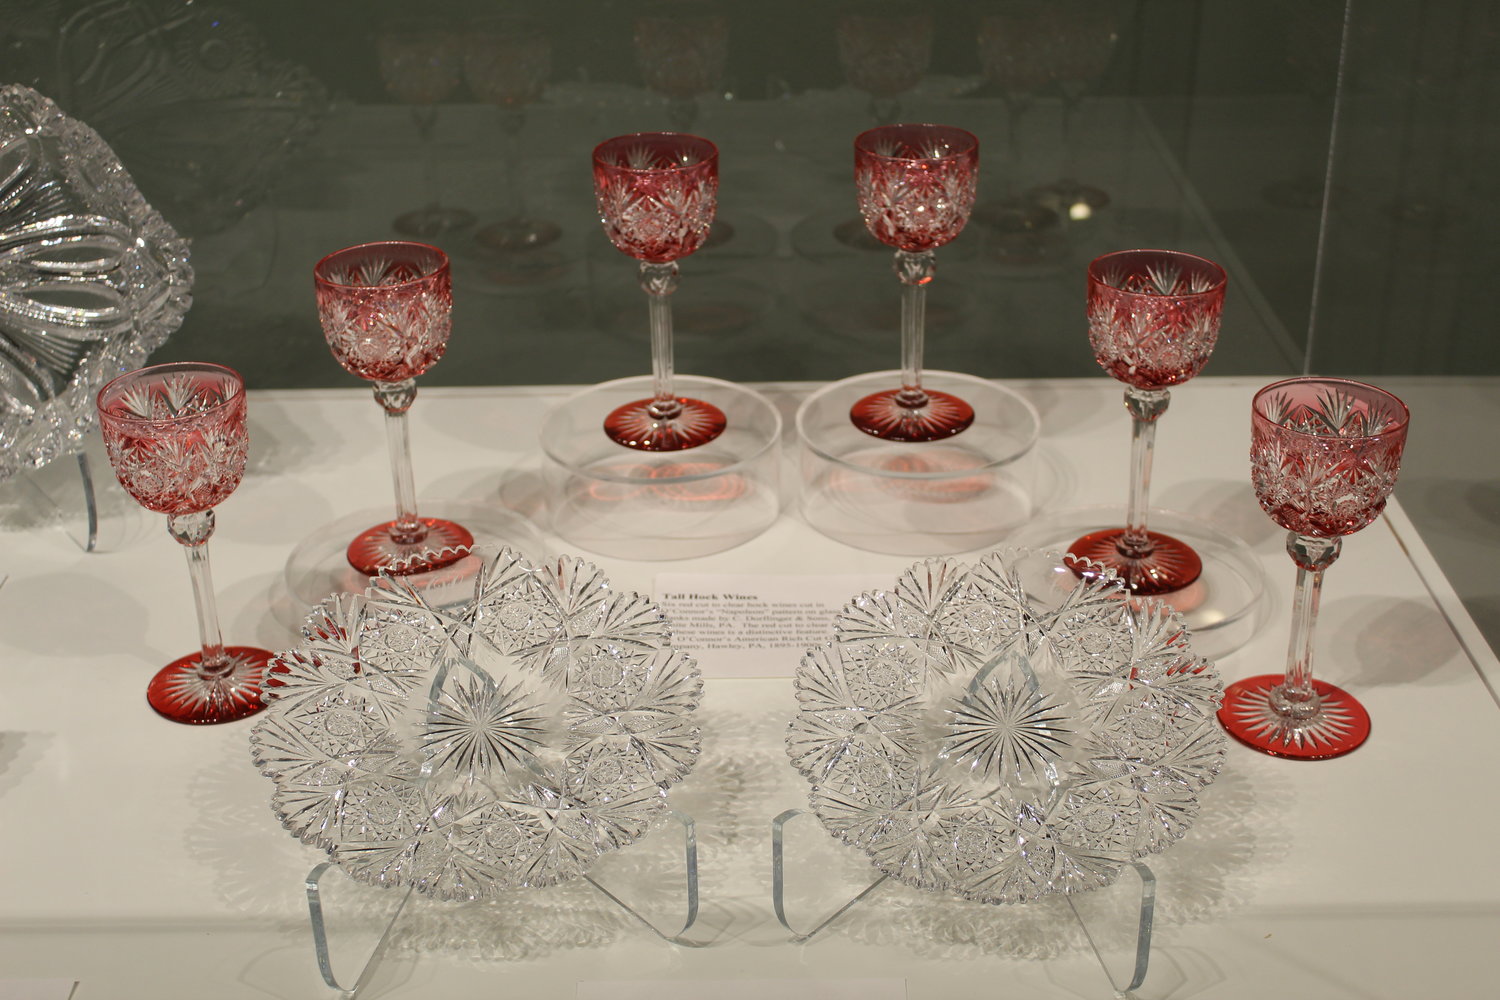 A great deal of the factory’s output was in special orders. Much of the glassware in the museum began as samples, kept on hand in case an item was broken or lost; then another could be quickly made.